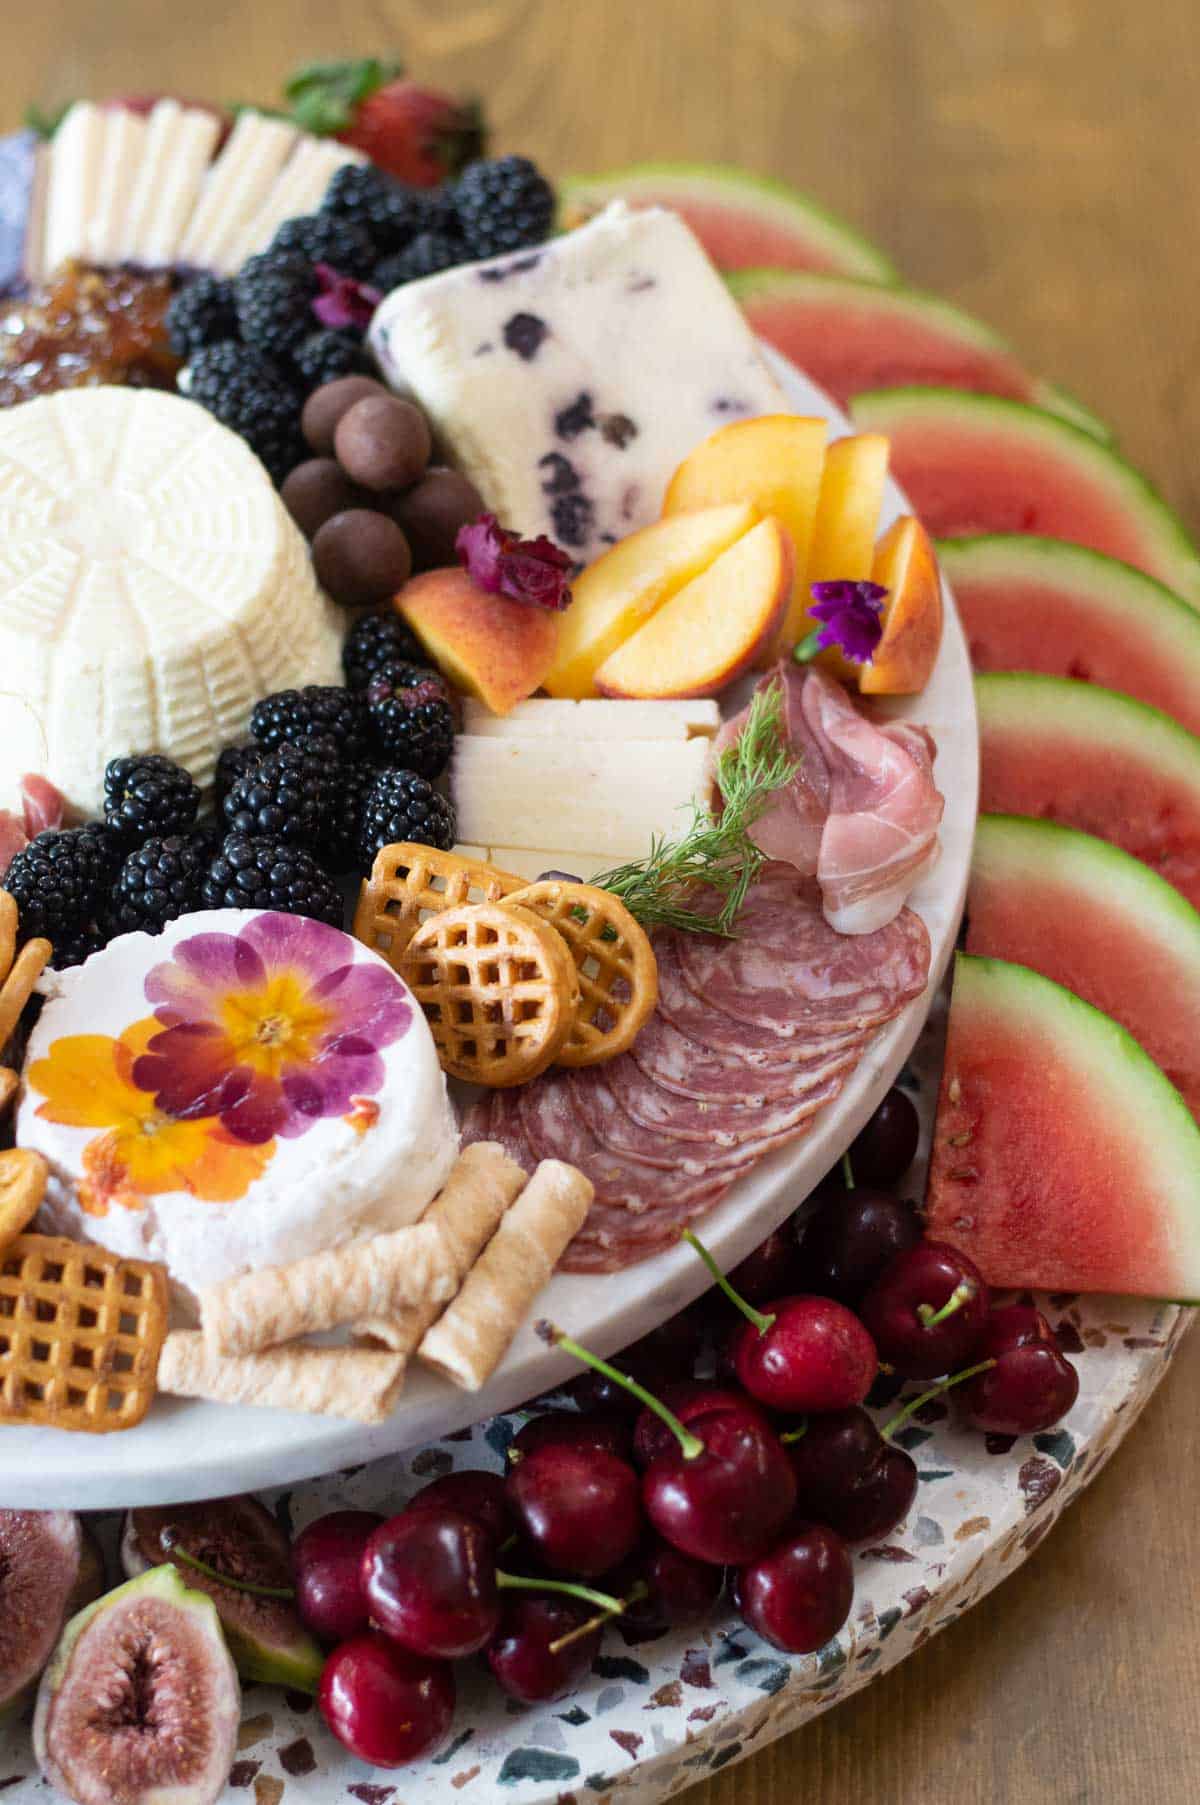 Summer charcuterie board with watermelon, berries, apples, meats, pretzels, and cheeses.